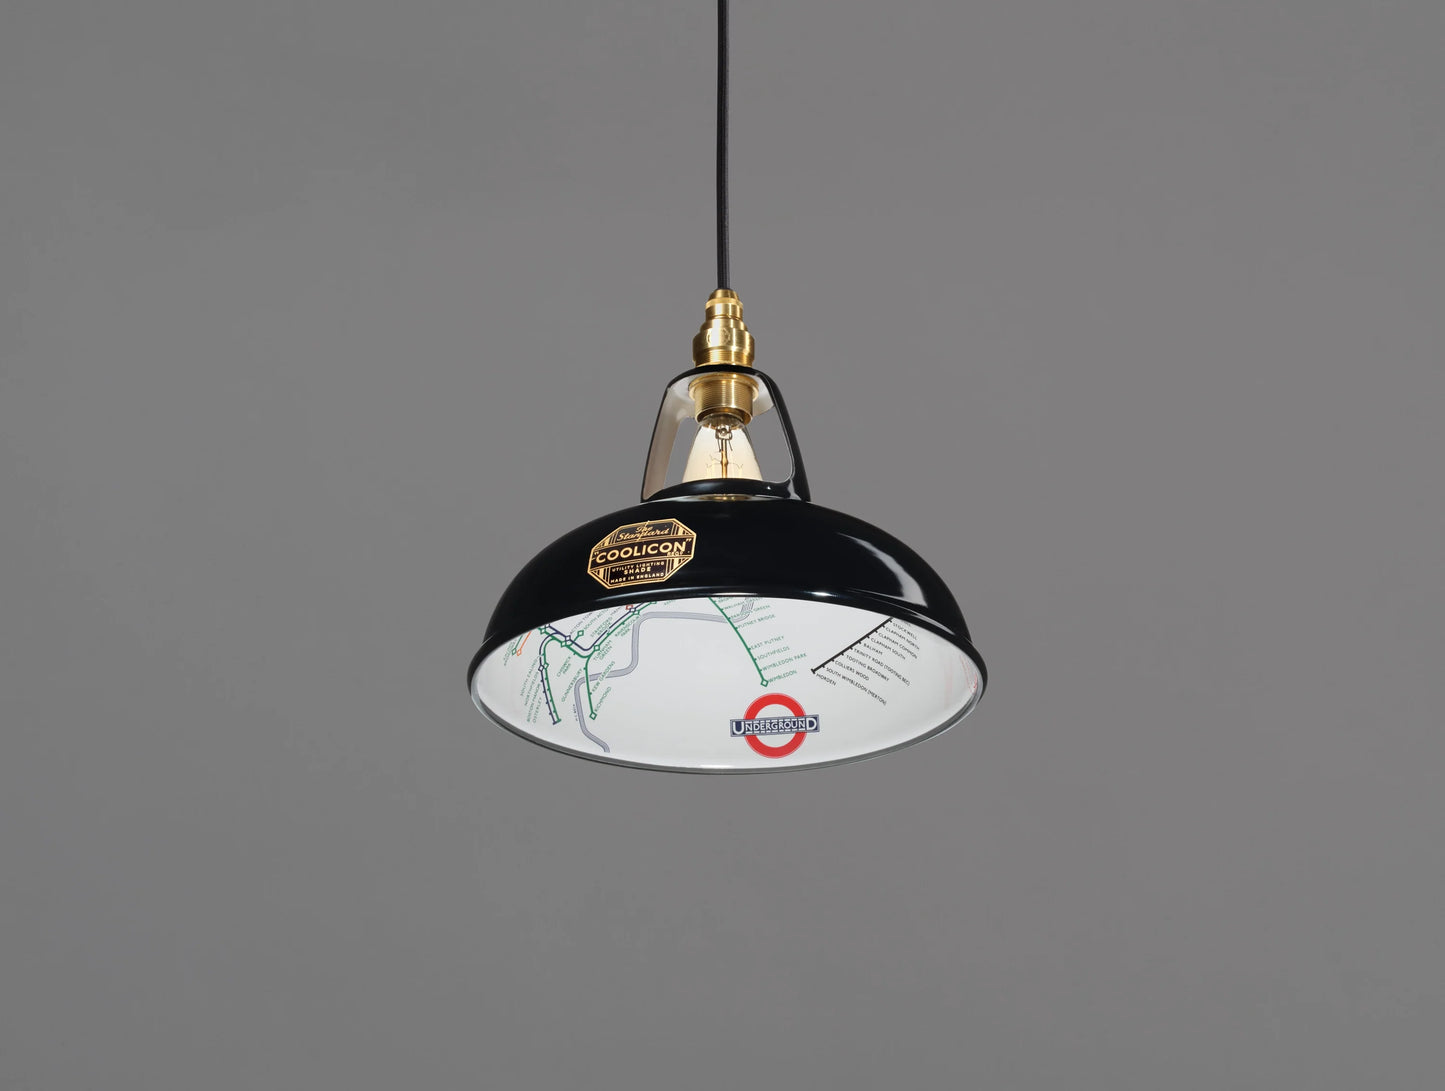 An Original Northern Line Black shade hanging over a grey background